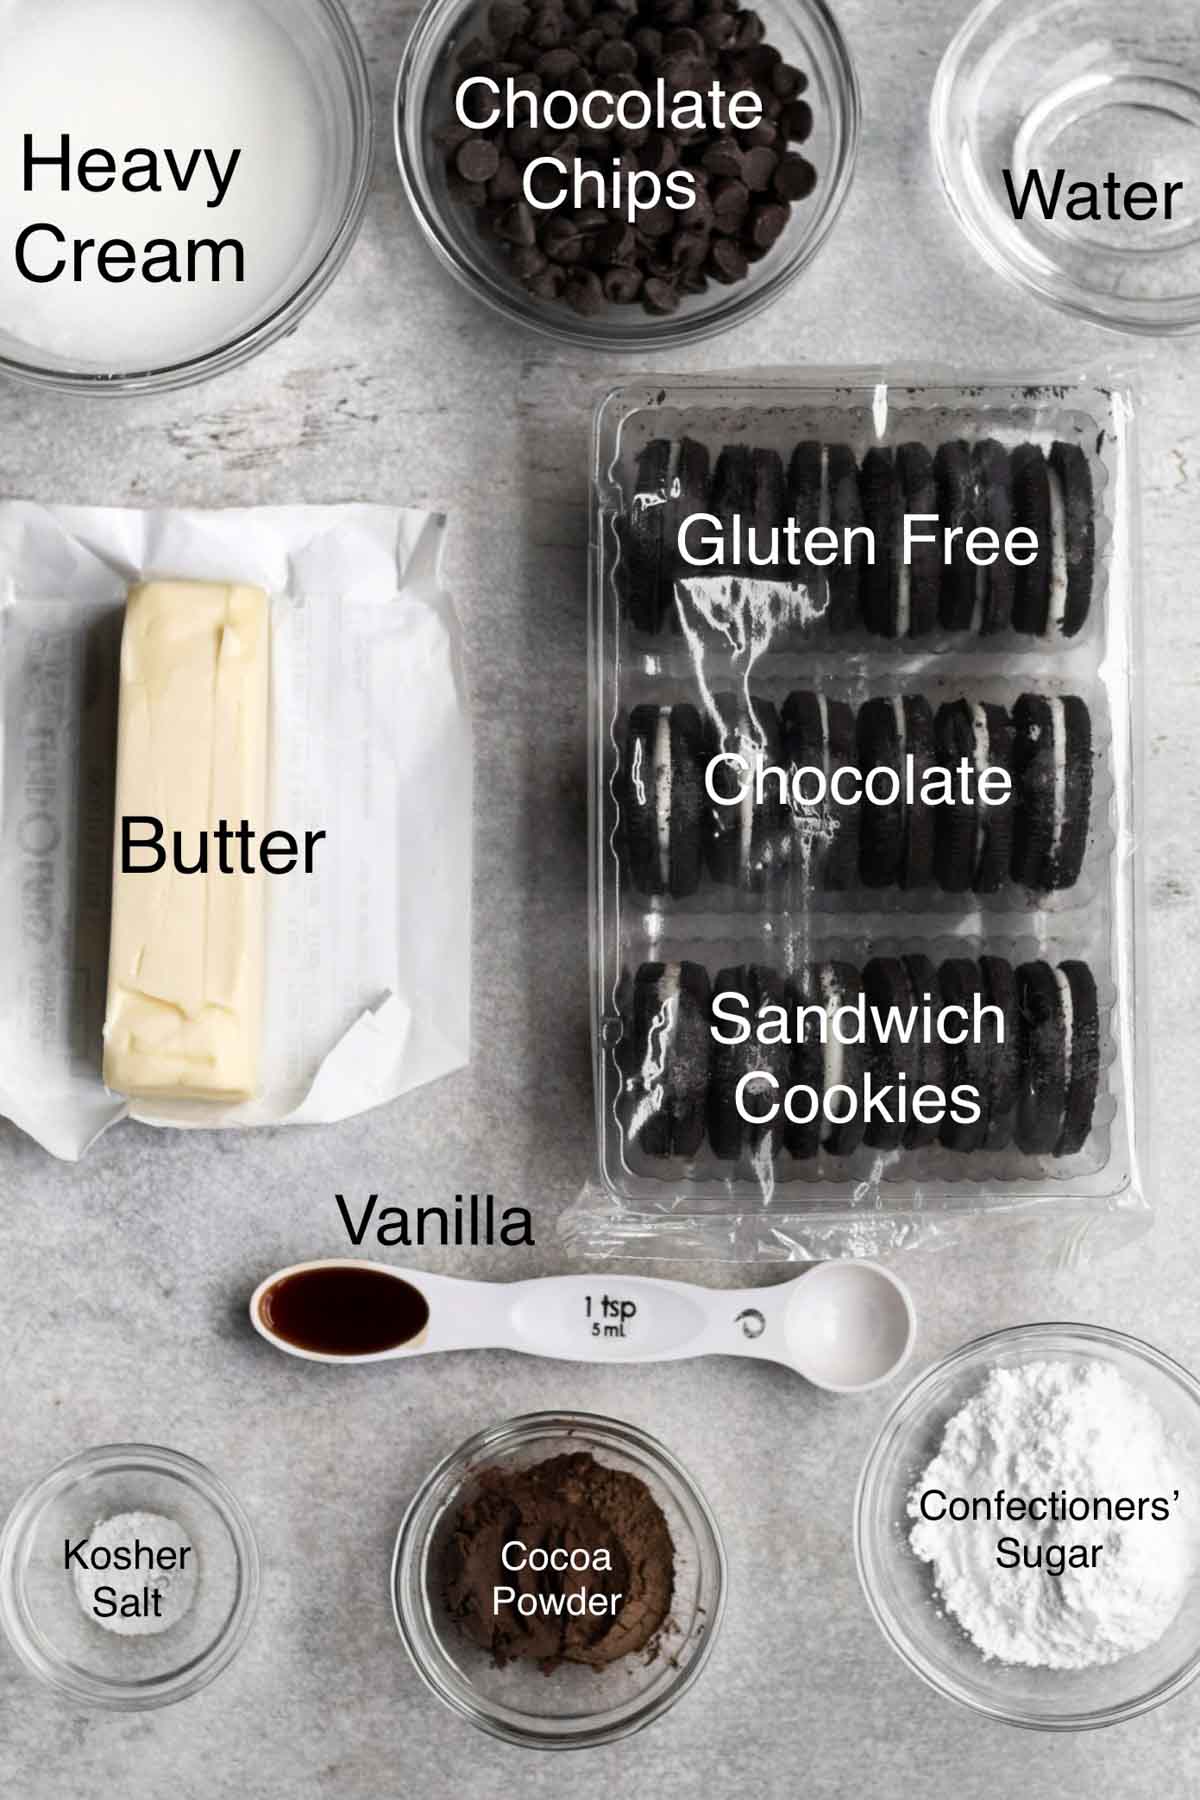 The ingredients for the pie in separate containers with their text names.